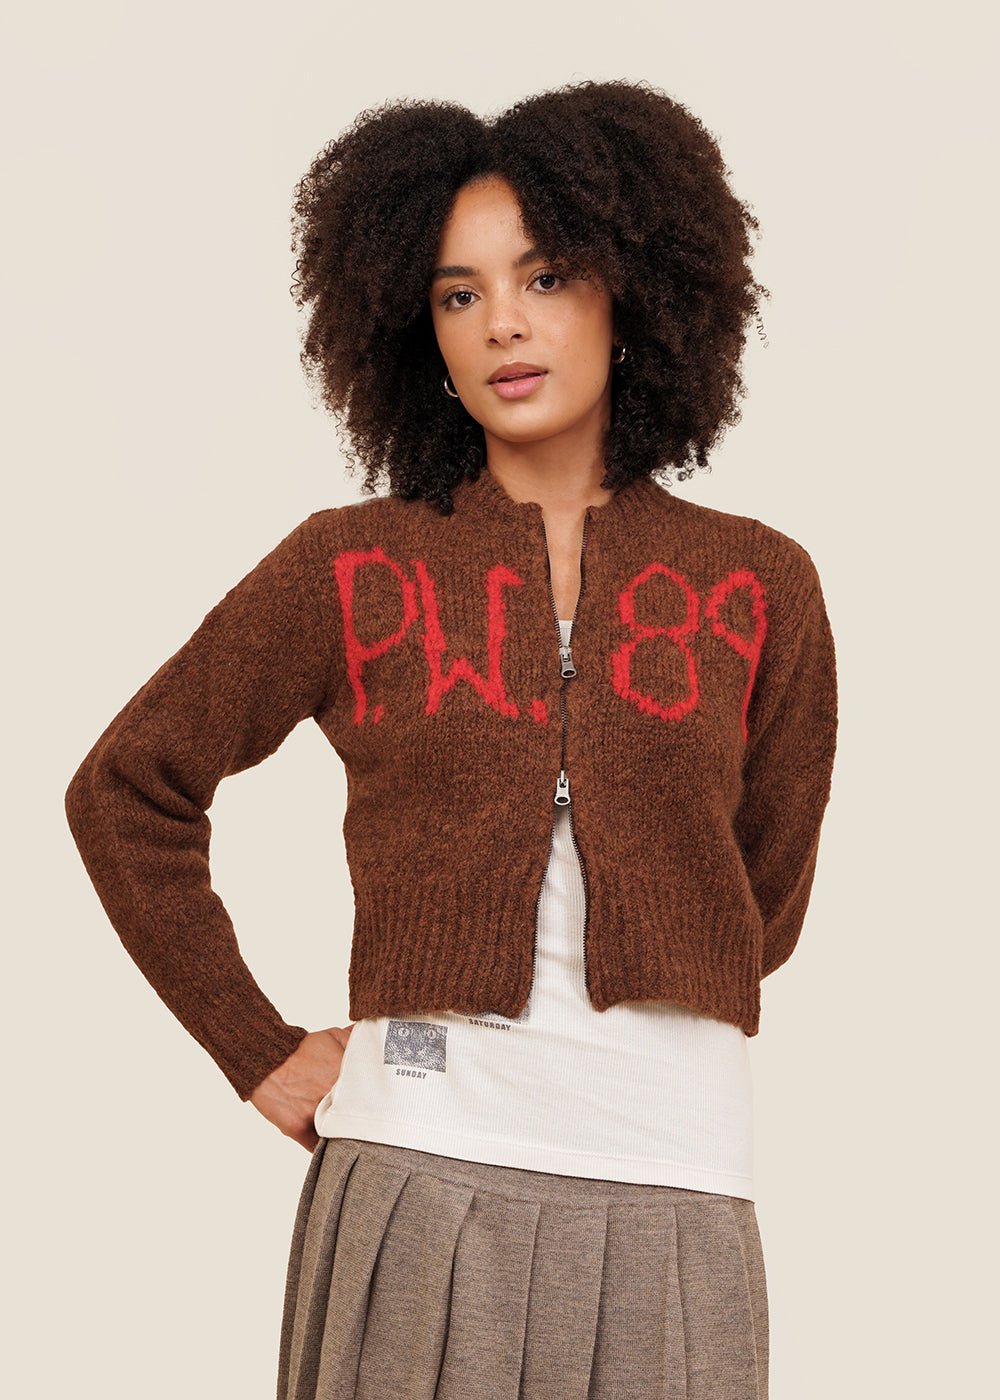 Ben Perdut Jacket in Brown by PALOMA WOOL – New Classics Studios